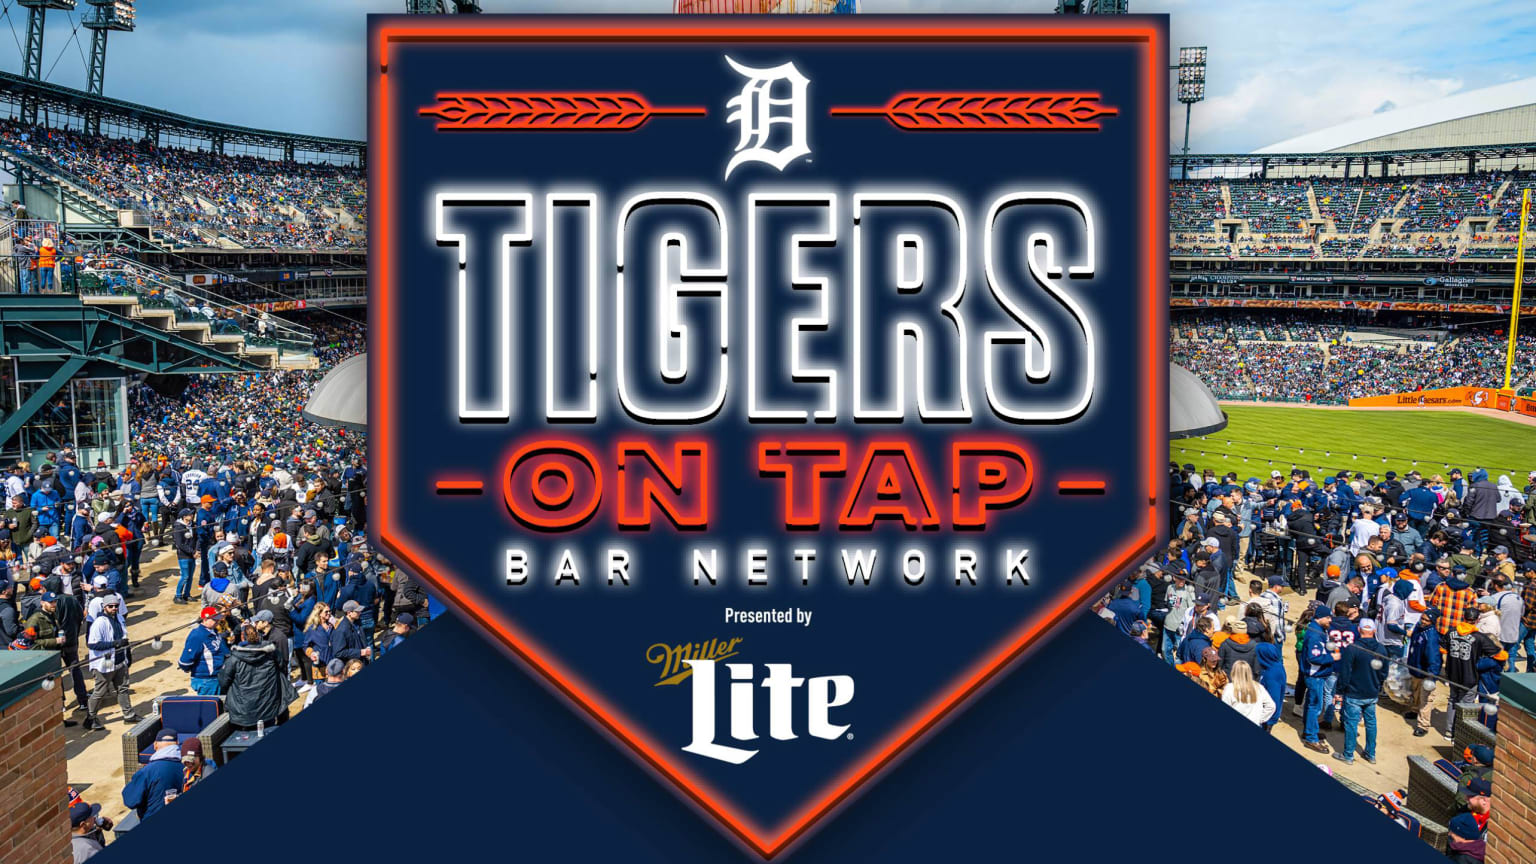 Giving Back to the Best Fans in Baseball: Tigers Announce Virtual Fan  Appreciation Weekend Sept. 25–27 - Ilitch Companies News Hub